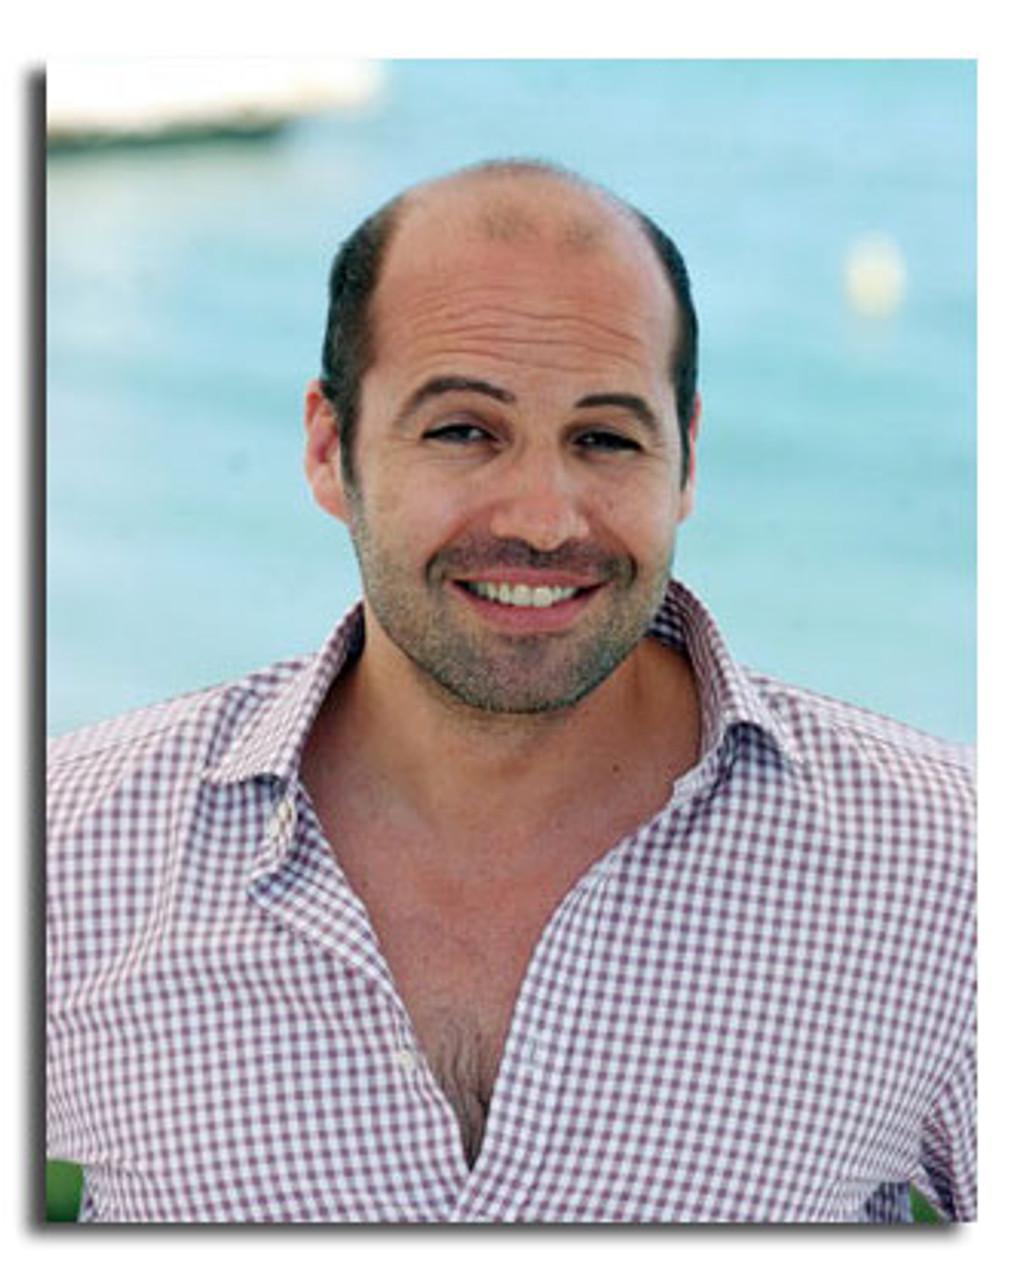 SS3593915 Movie picture of Billy Zane buy celebrity photos and